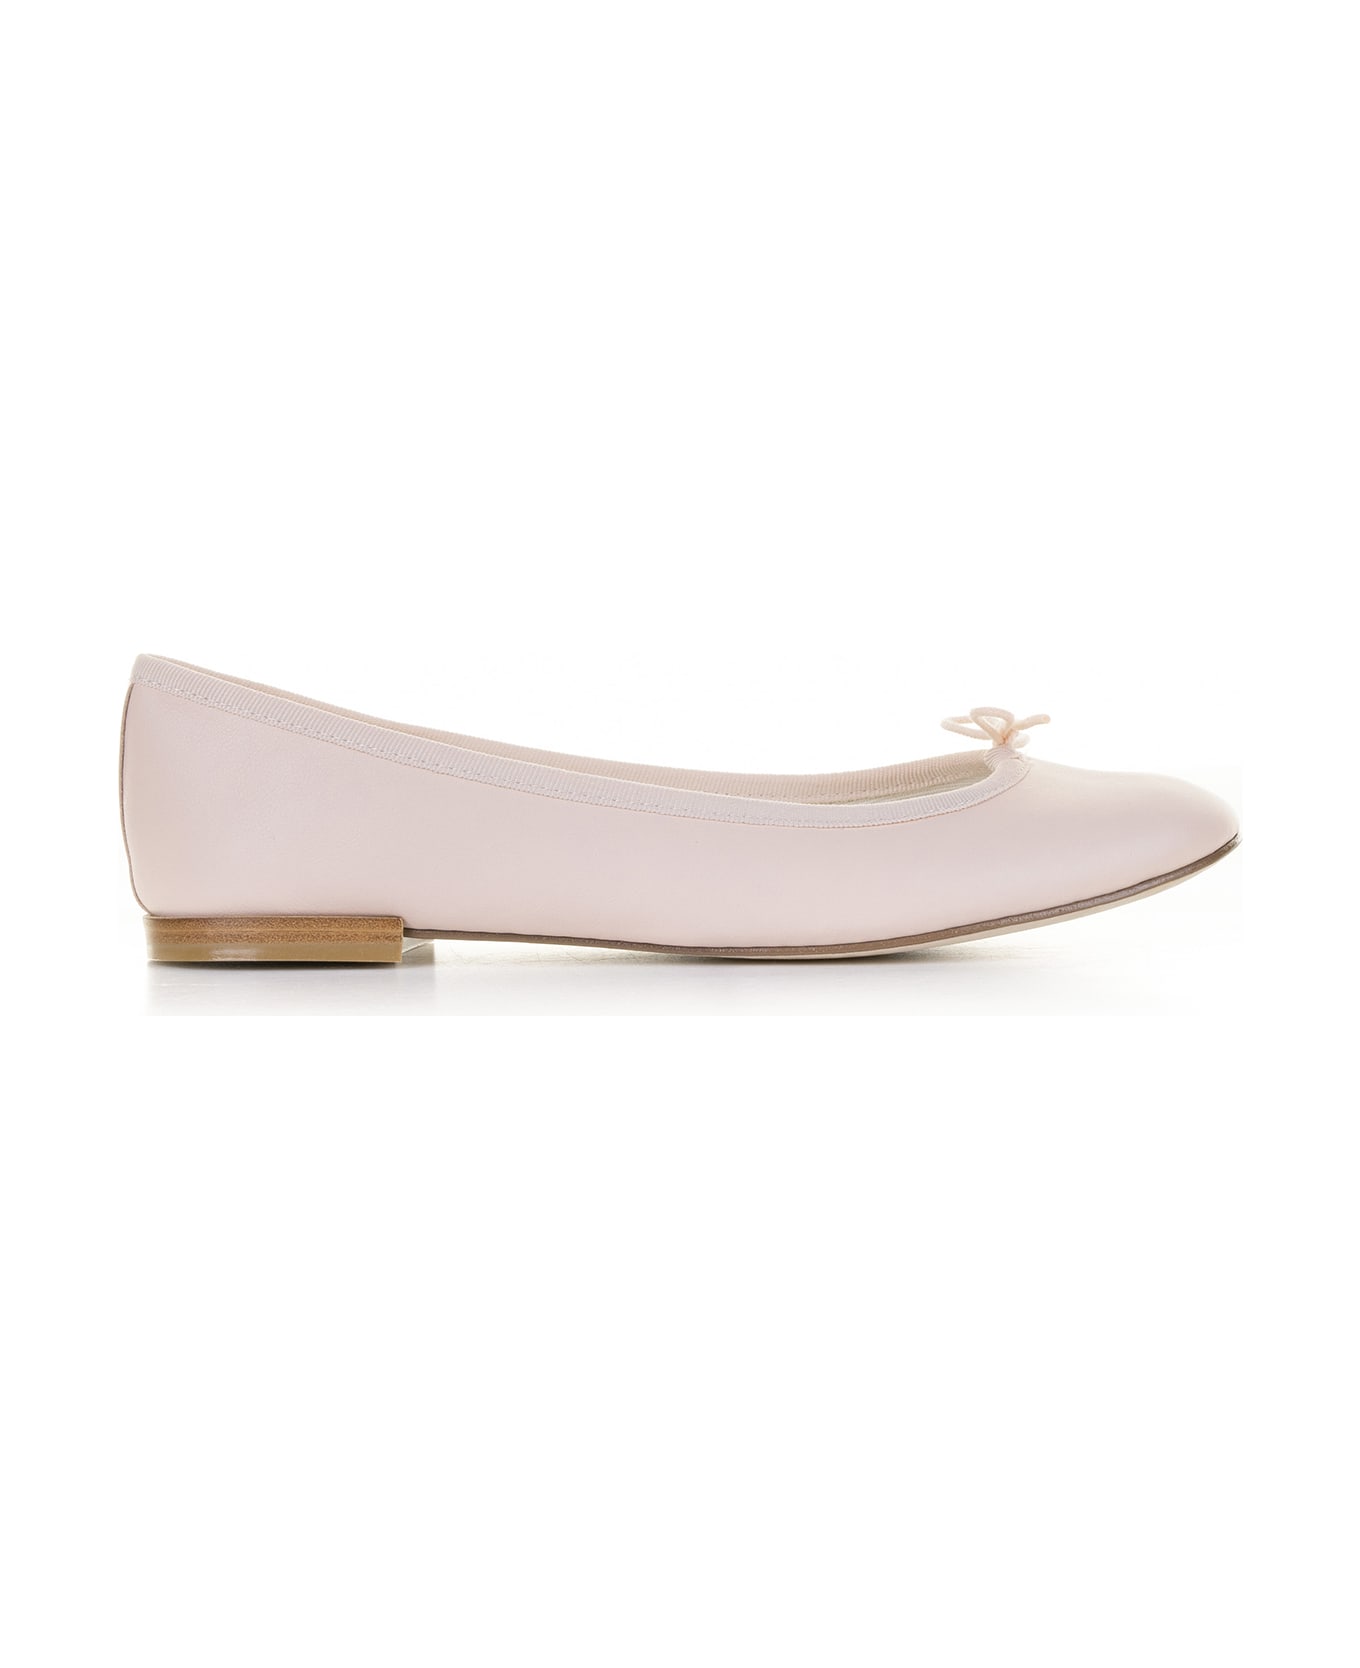 Repetto Light Pink Leather Ballet Flat - ICONE フラットシューズ